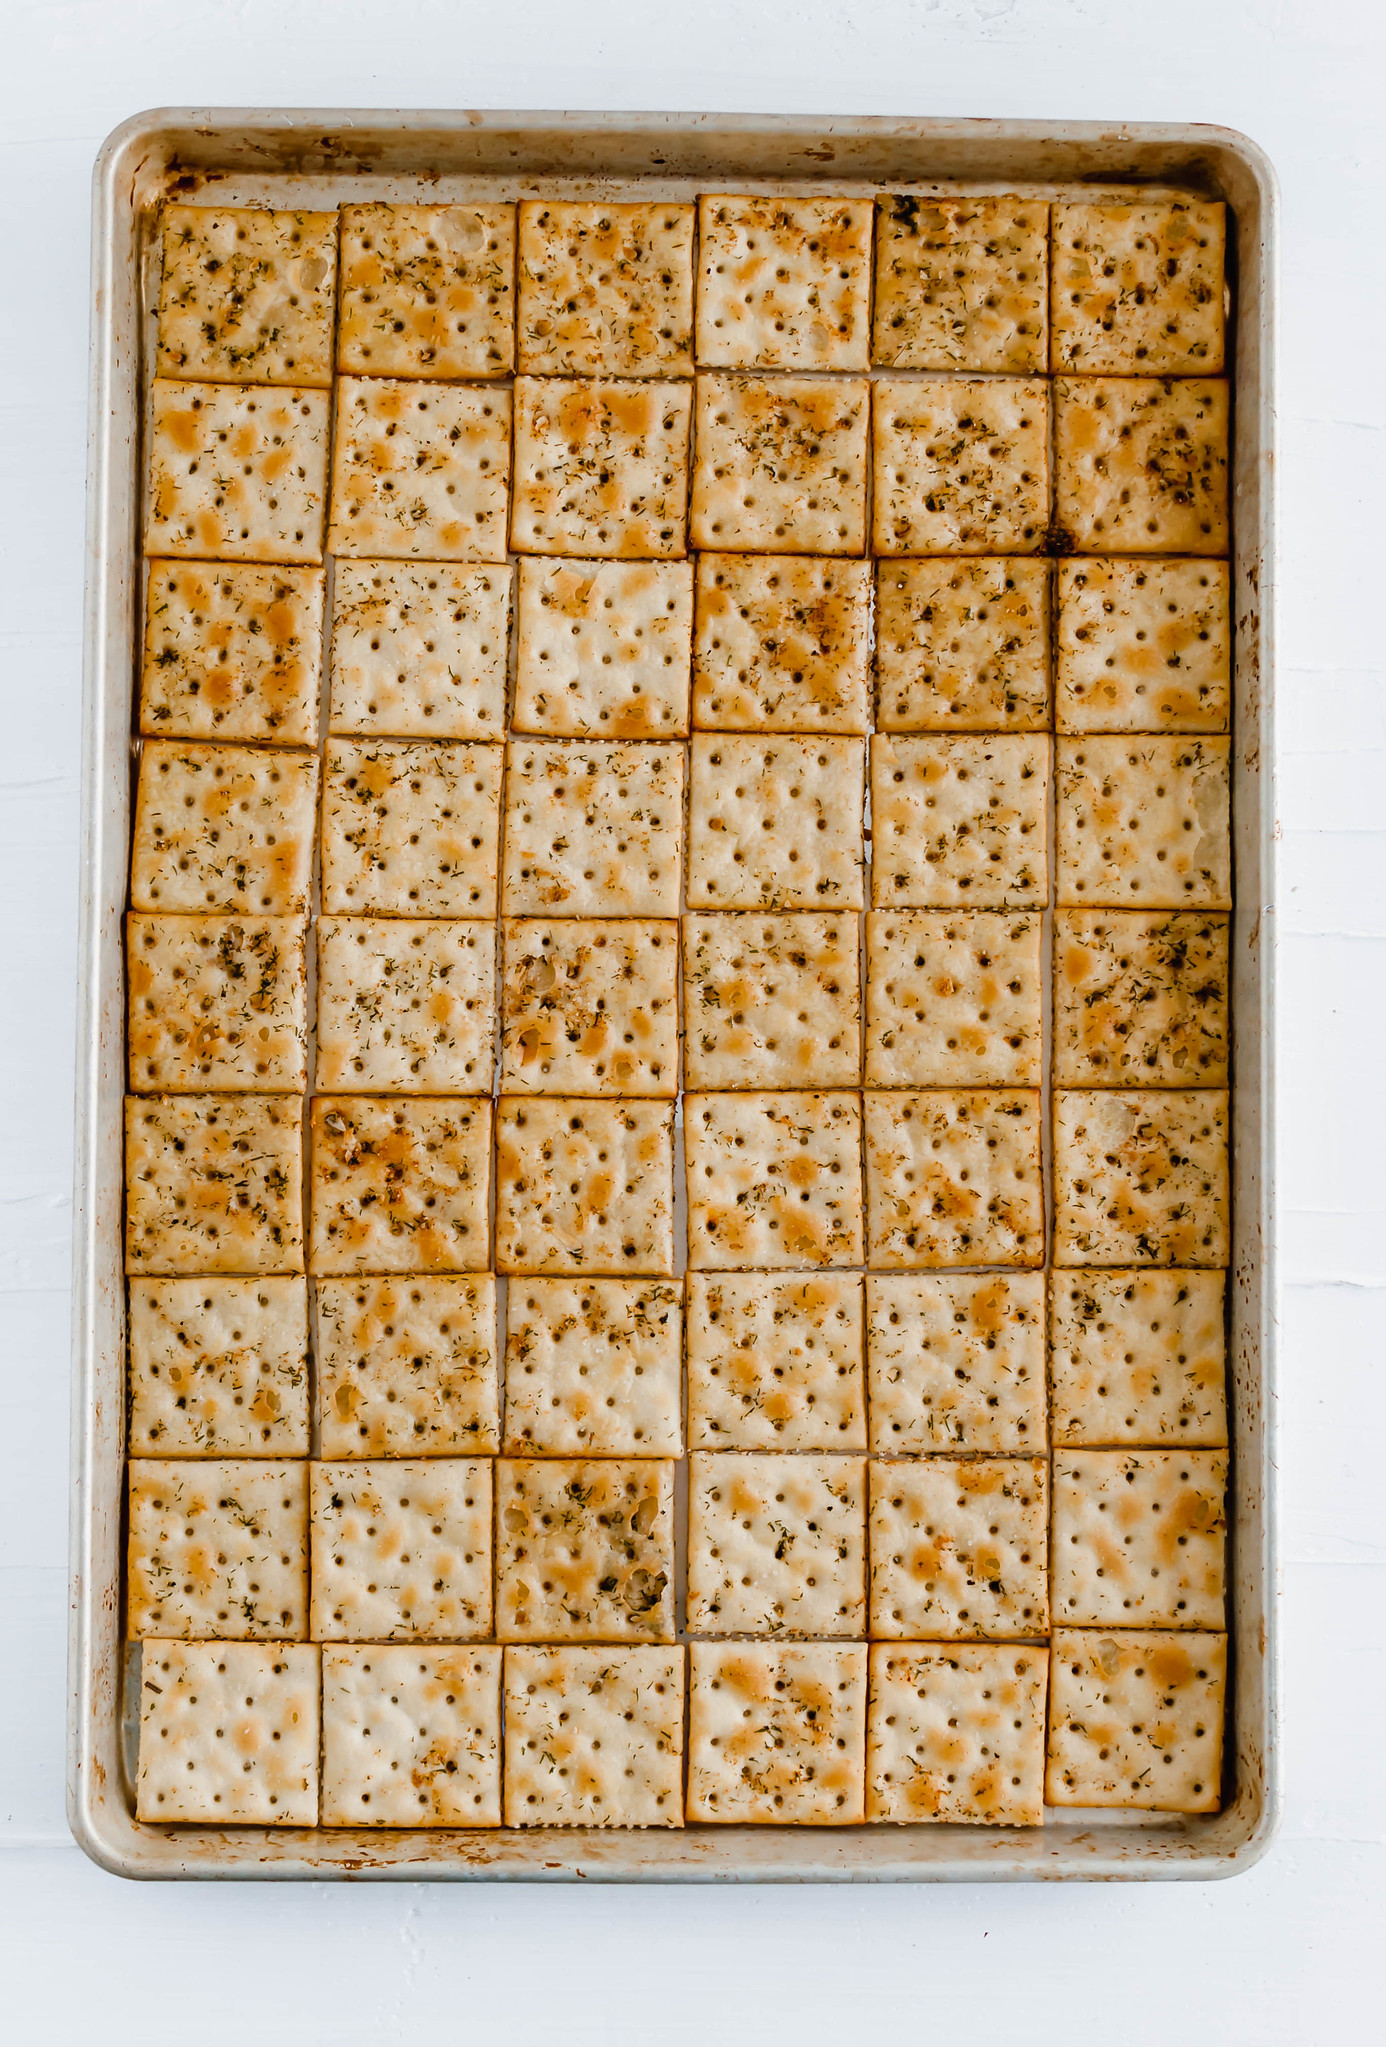 Seasoned Saltine Crackers are wonderful as a snack or a dipper for all the soups this winter. Tossed in oil, spices and herbs then baked to crispy perfection.